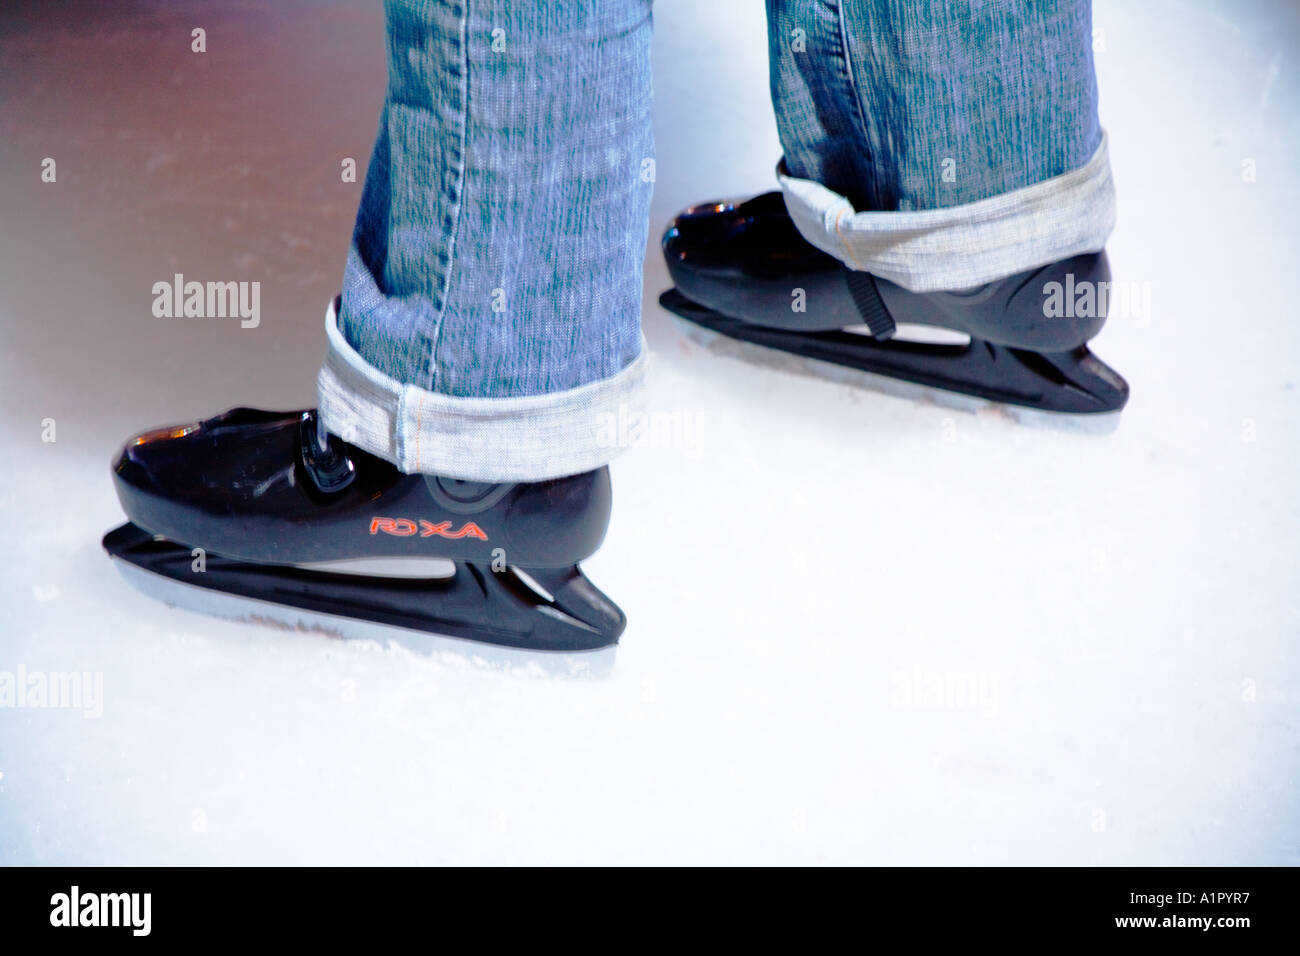 Black ice skating shoes worn on an ice rink. Stock Photo